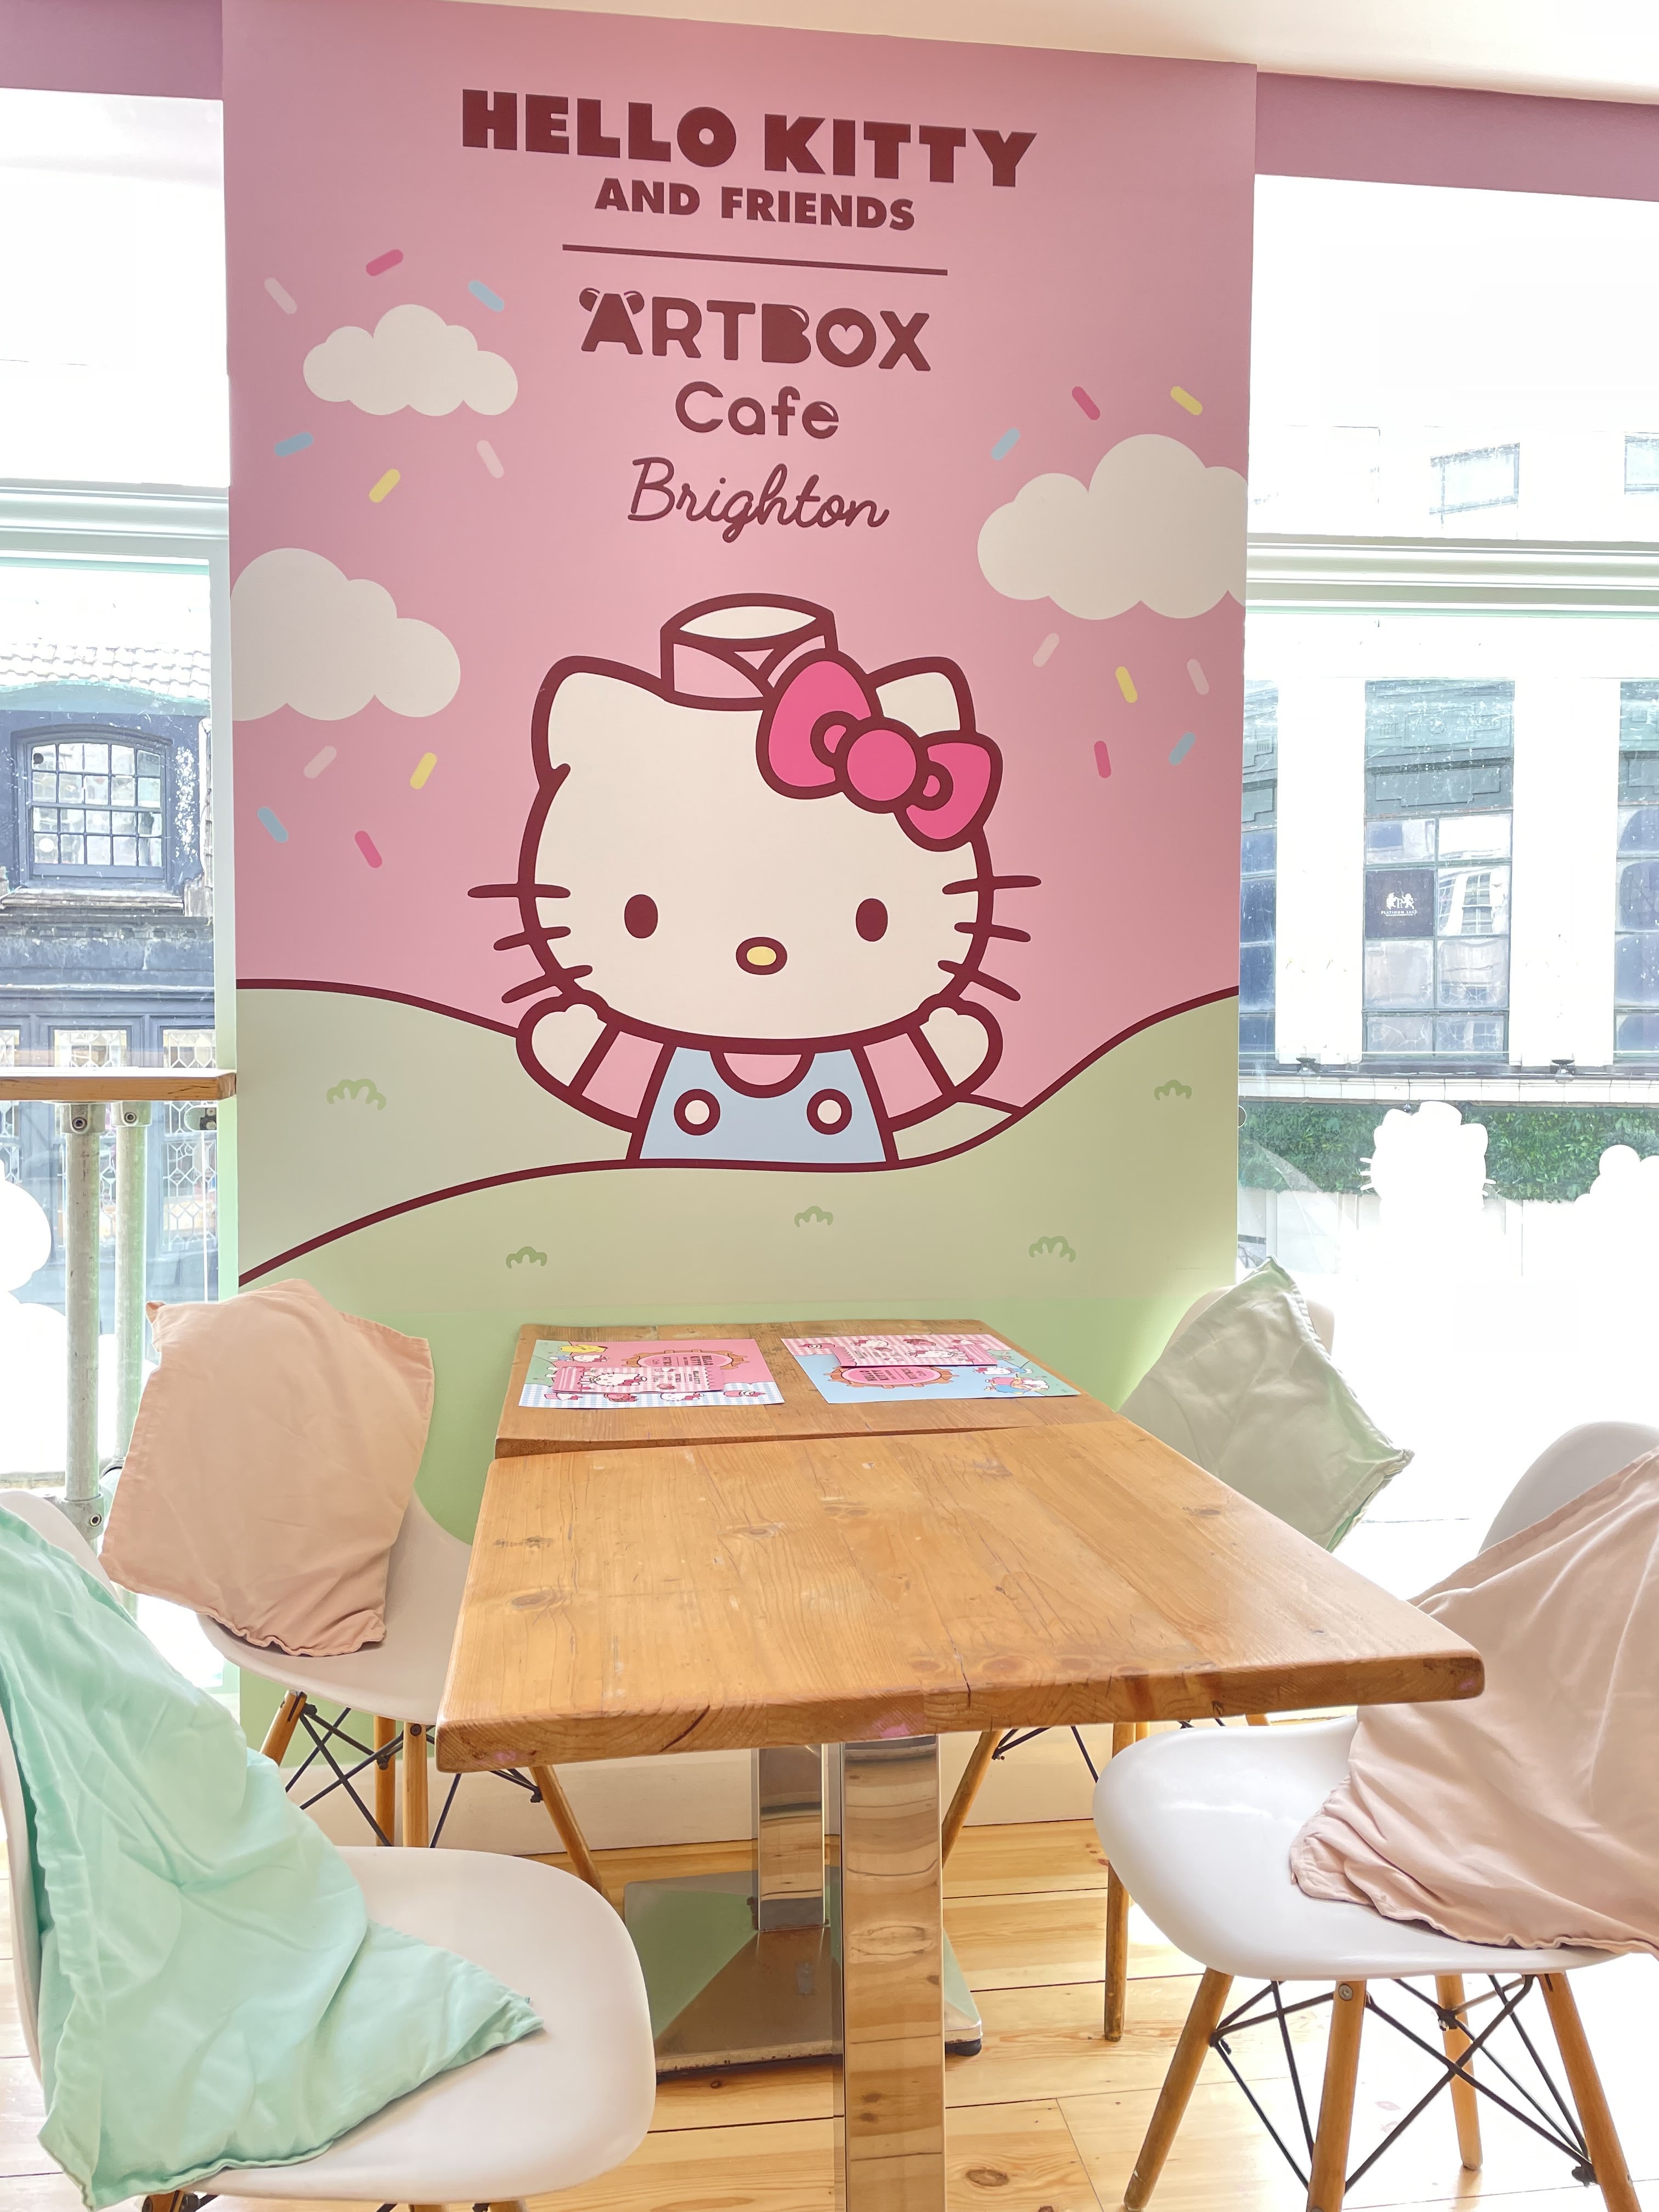 A four seater table in front of a Hello Kitty wall decal which reads, 'Hello Kitty and Friends Artbox Cafe Brighton'